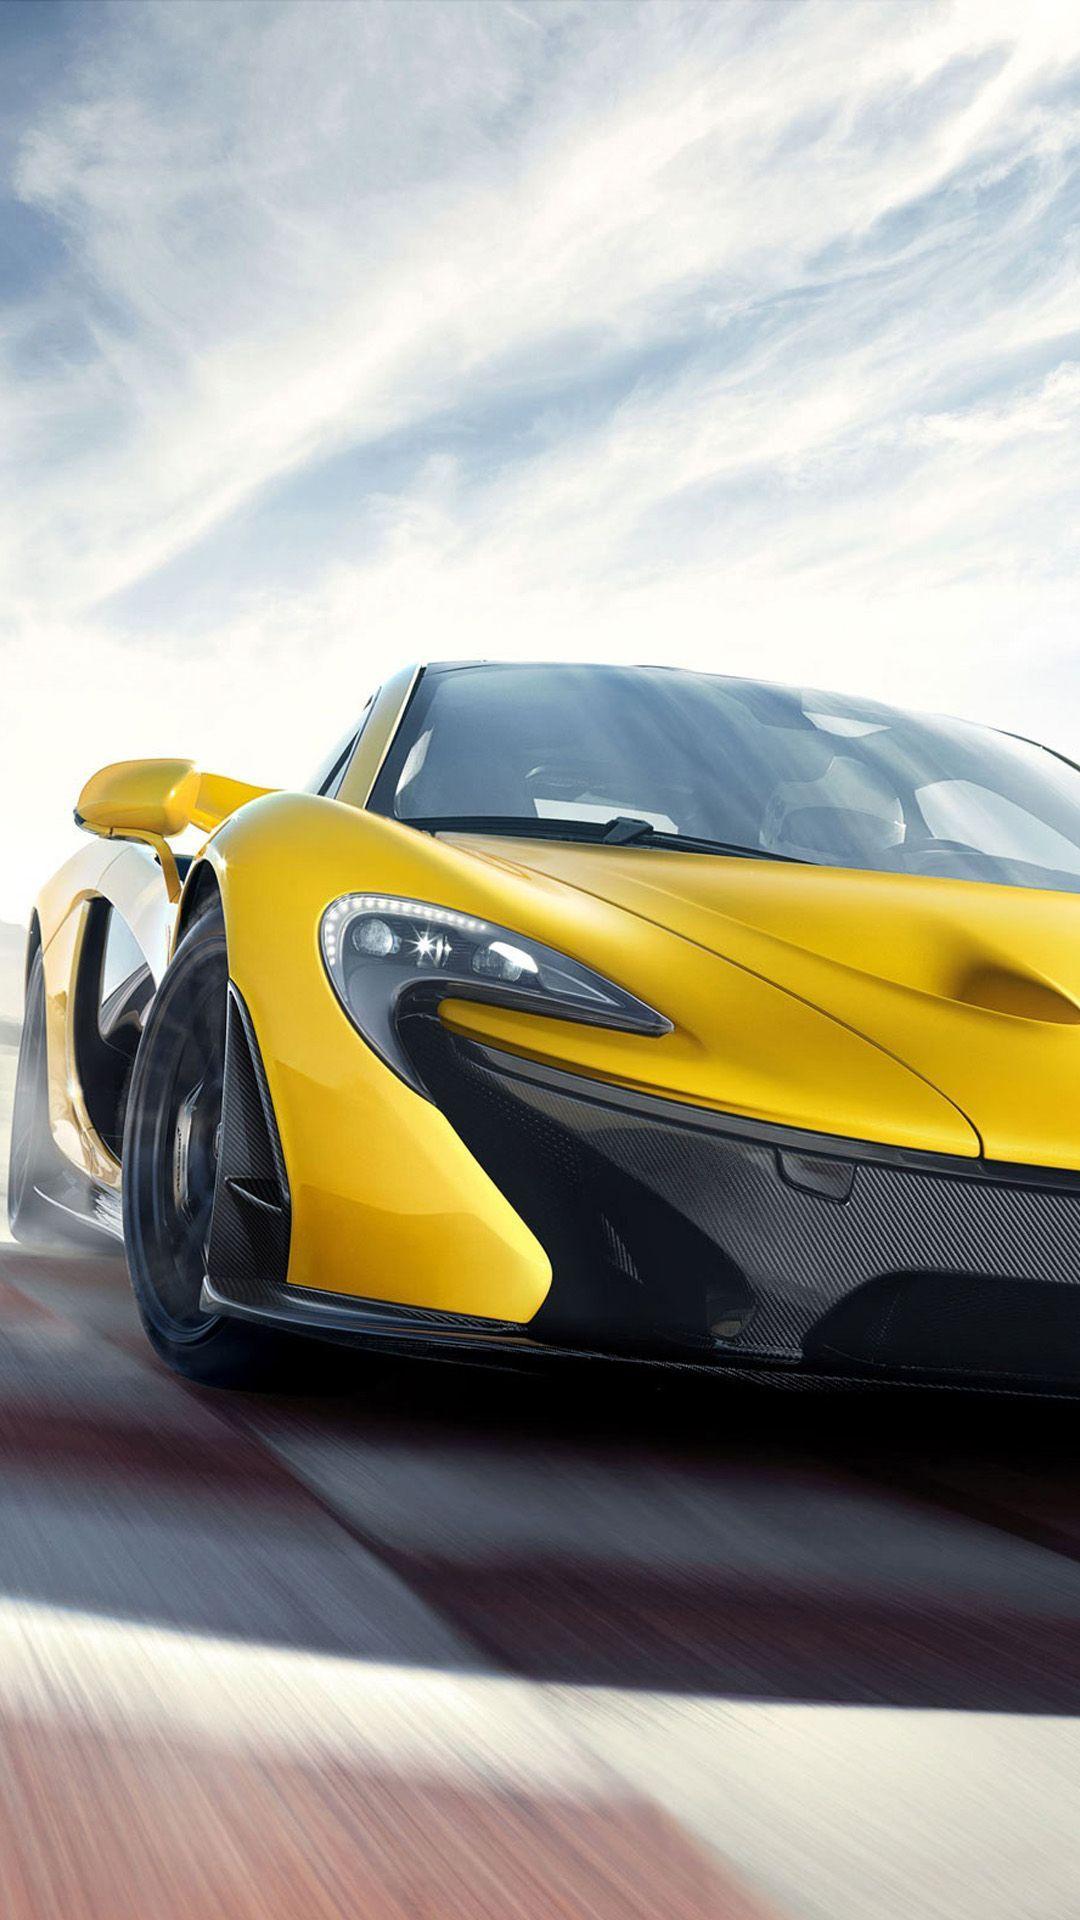 McLaren P1 2014 htc one wallpaper, free and easy to download